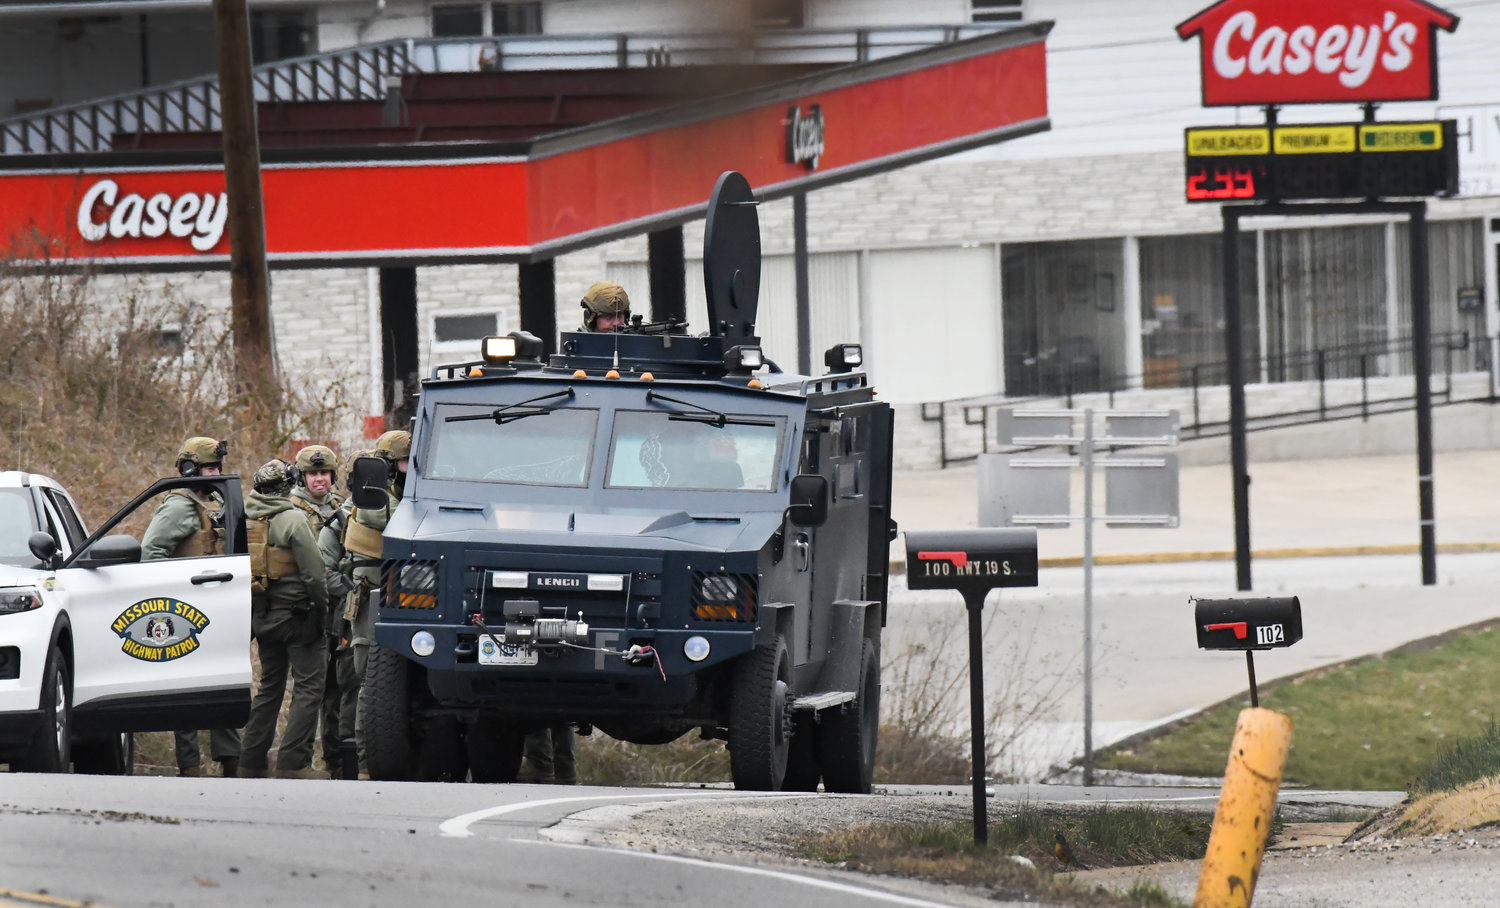 Missouri State Highway Patrol tactical units staged on Highway 19 a block north of the Casey’s store on Monday morning. After deploying tear gas into the residence at 102 Market, Kenneth Lee Simpson stepped out of a side door and surrendered. He was believed to have been hiding since Sunday night in the basement.